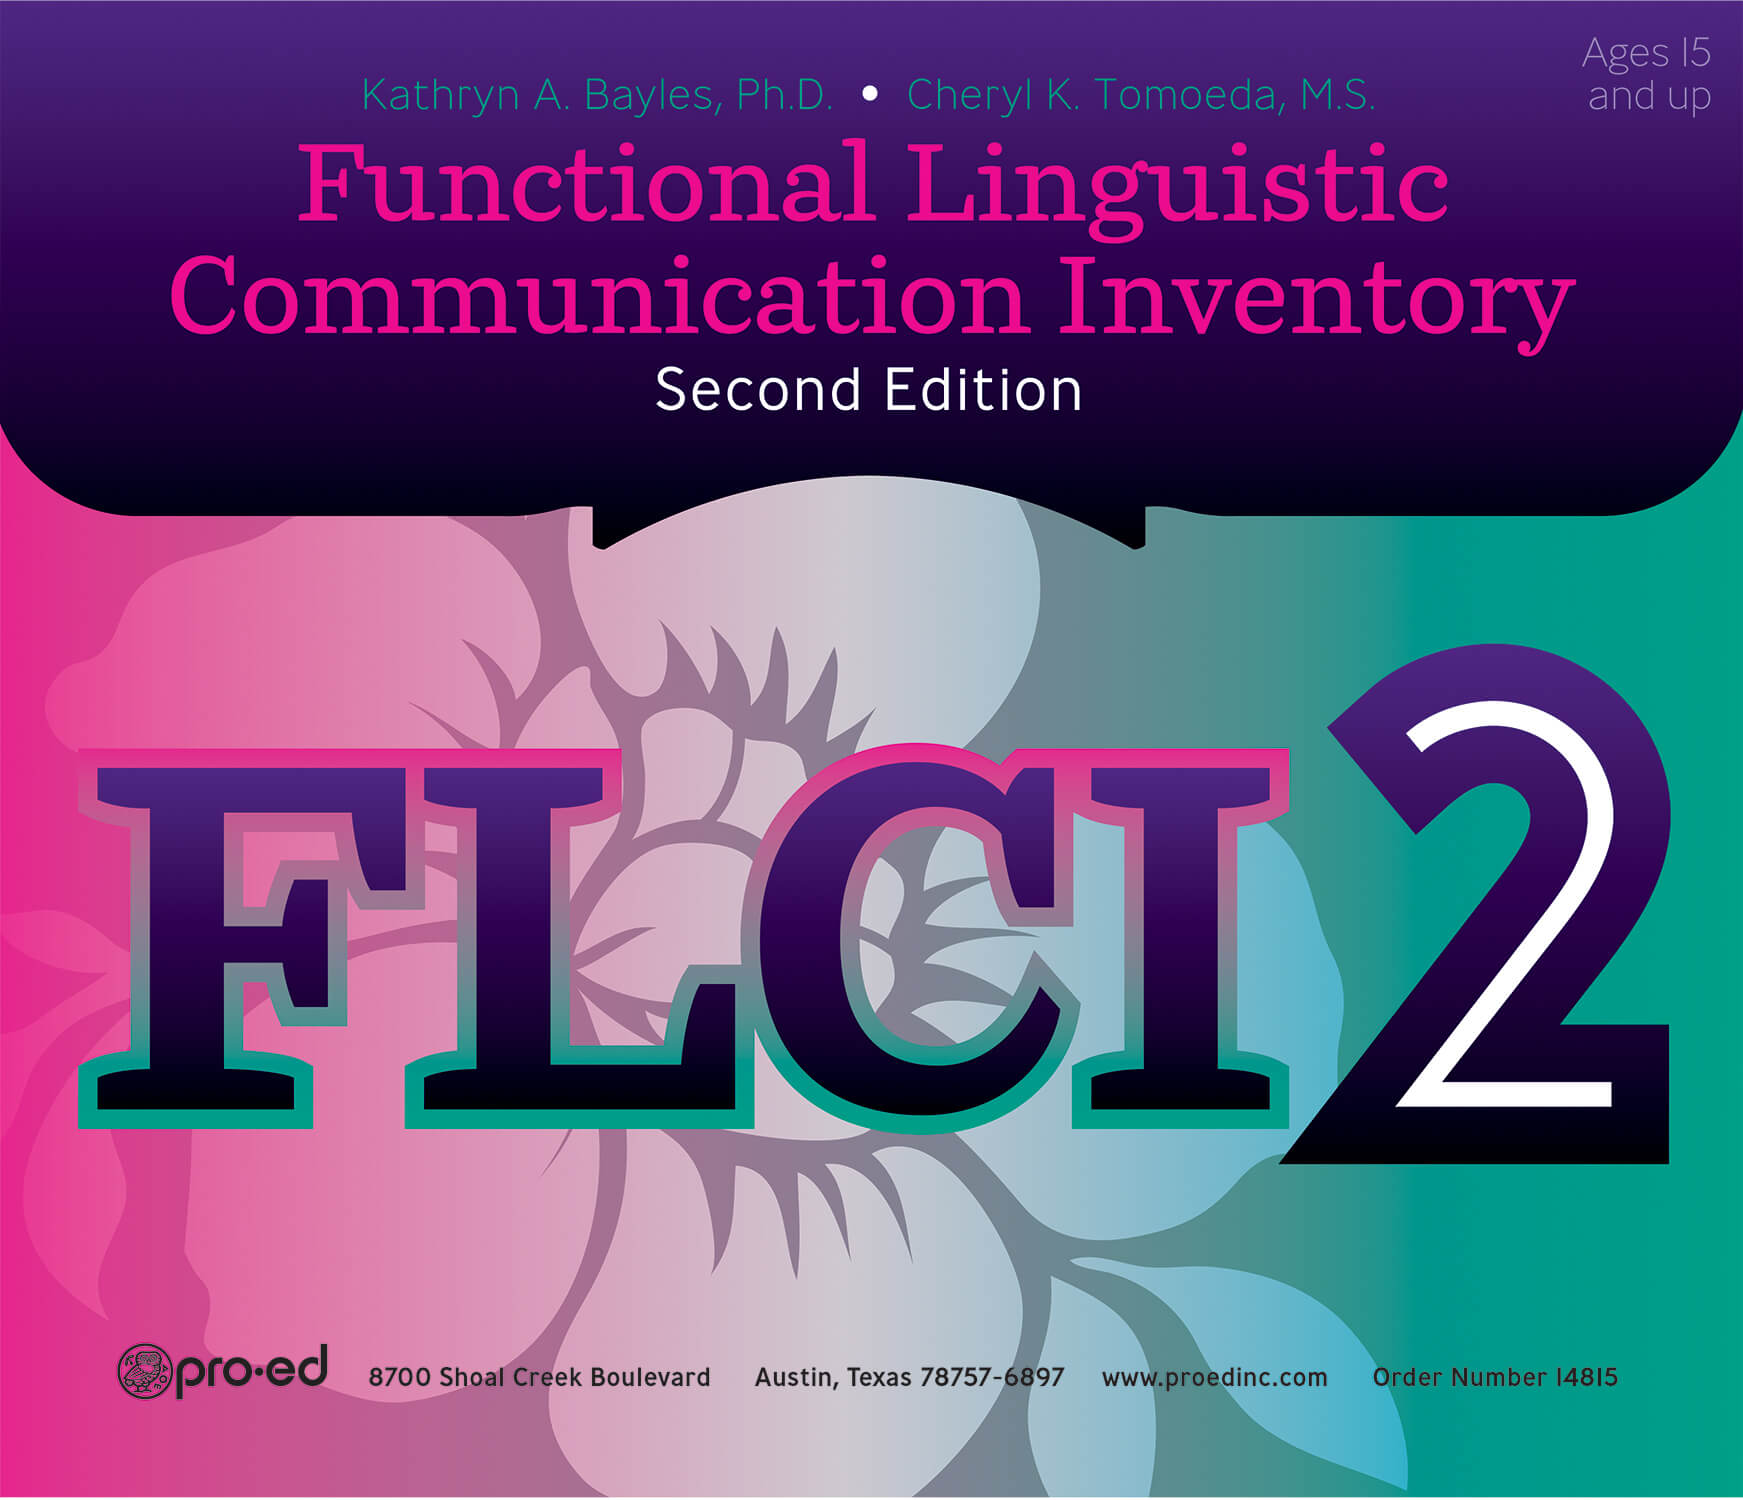 FLCI–2: Functional Linguistic Communication Inventory 2nd Ed - 